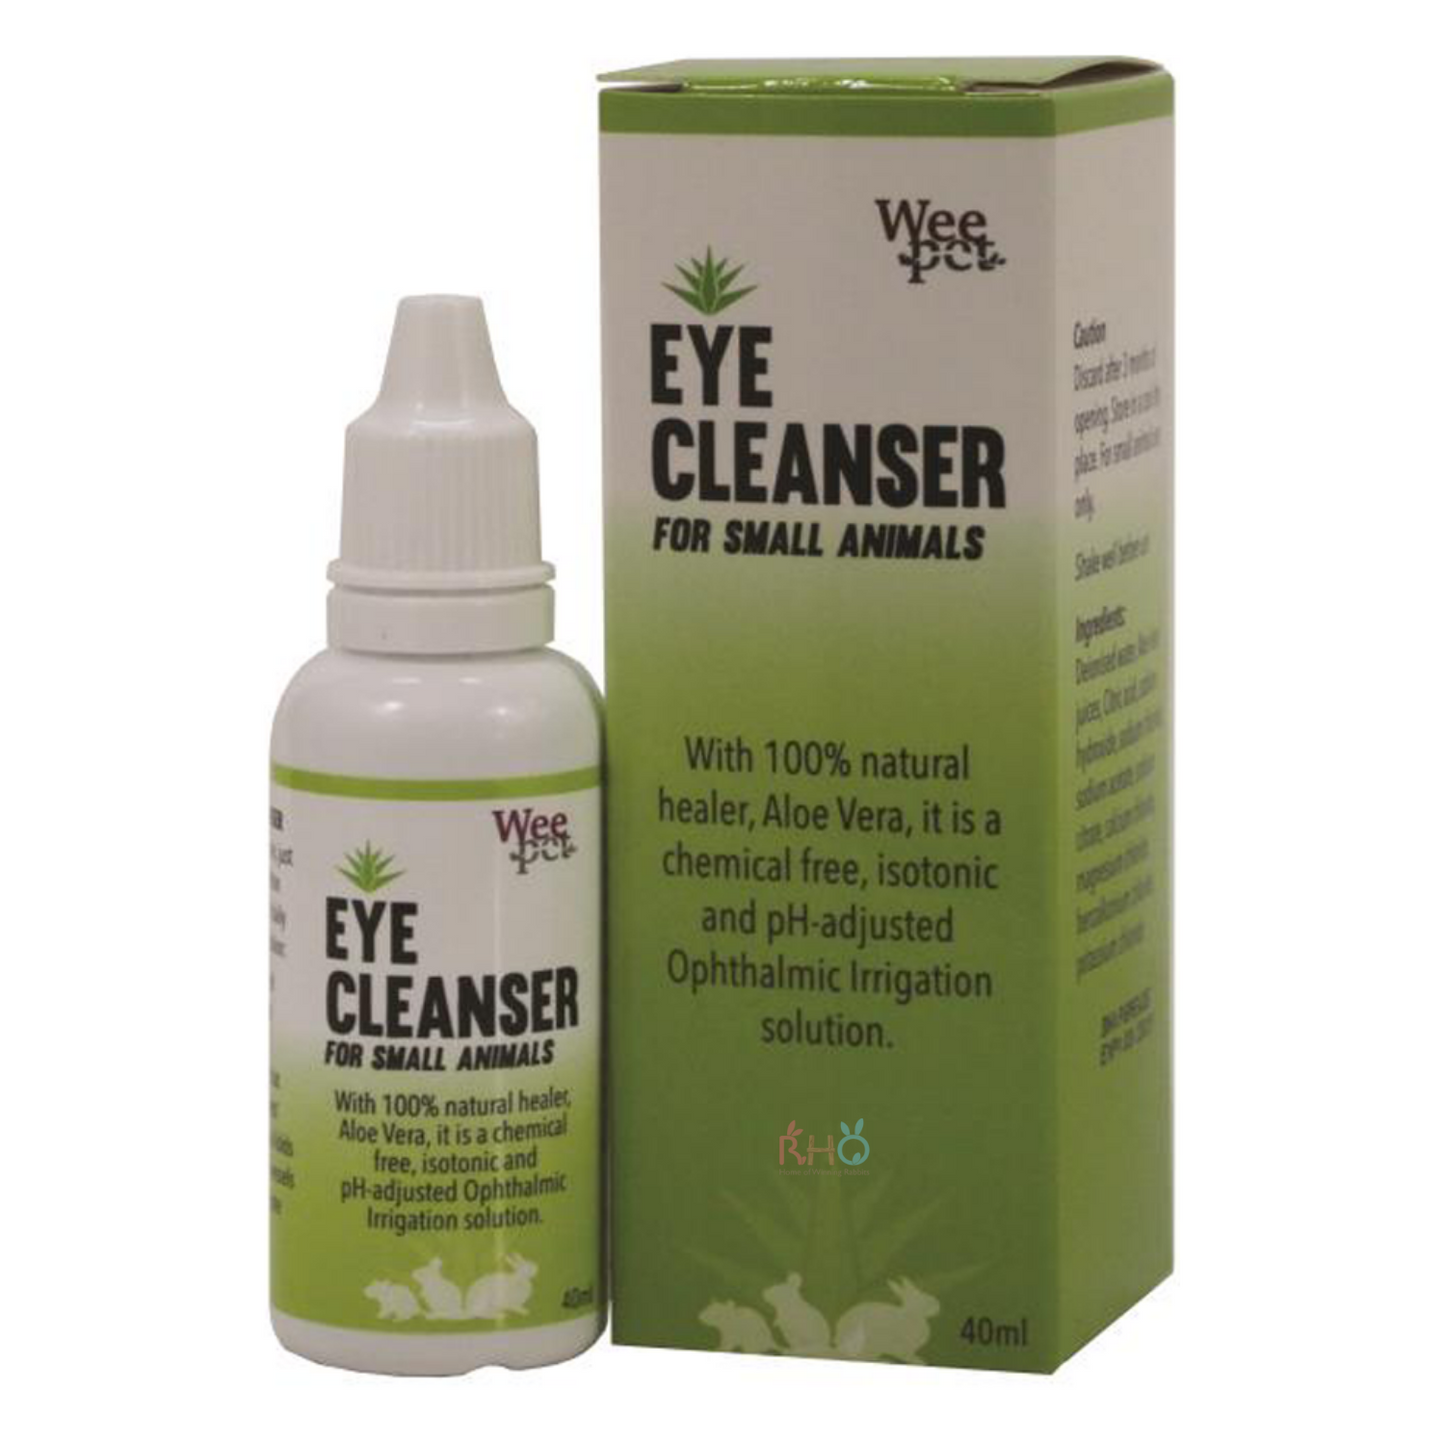 Weepet Eye Cleanser For Small Animals 40ml